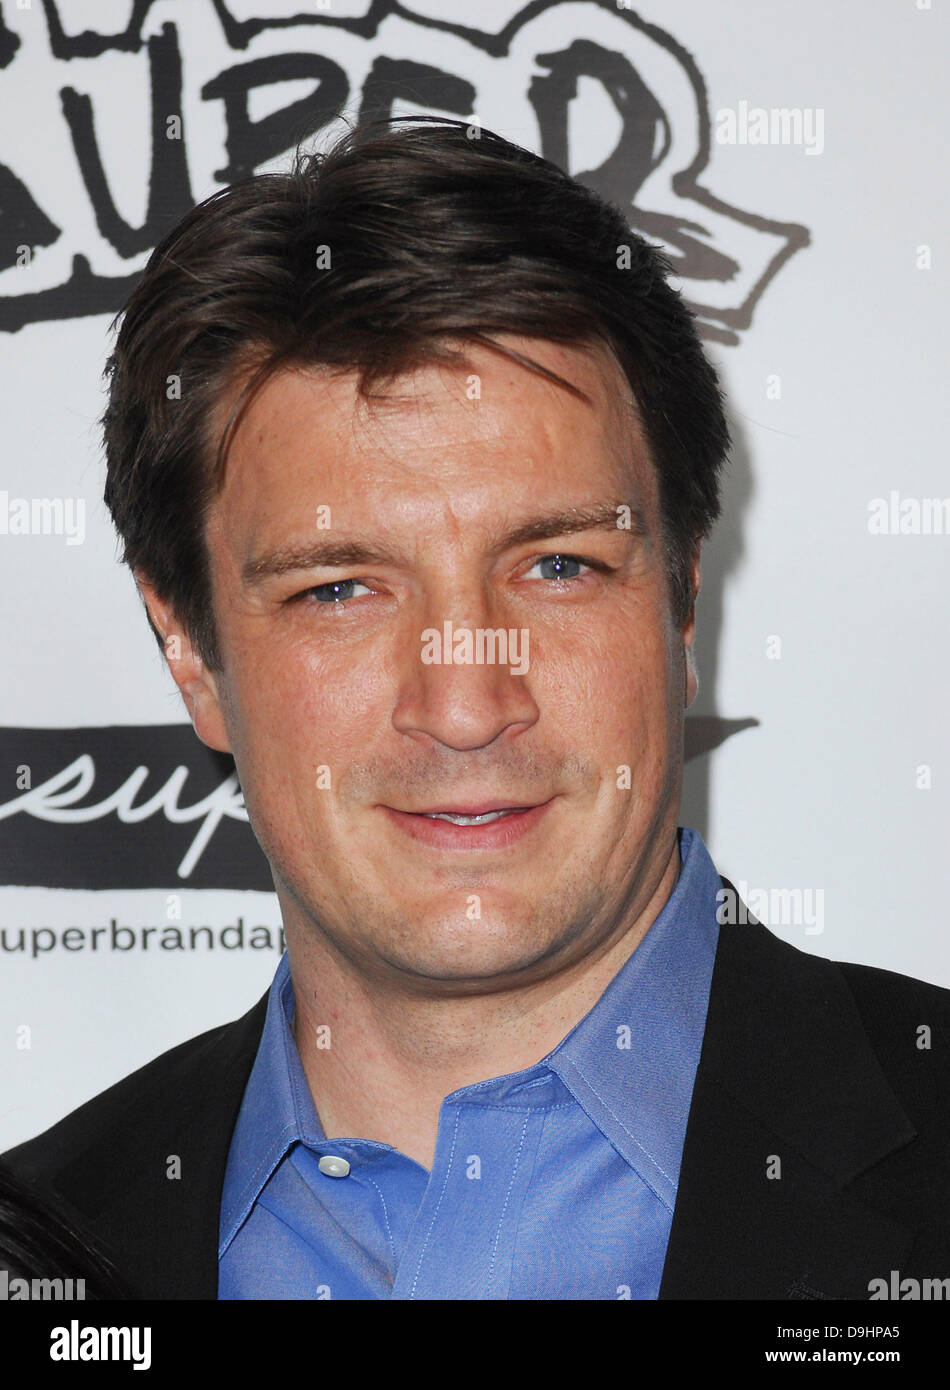 Nathan Fillion  Los Angeles Premiere of 'Super' held at The Egyptian Theatre Hollywood, California - 21.03.11 Stock Photo